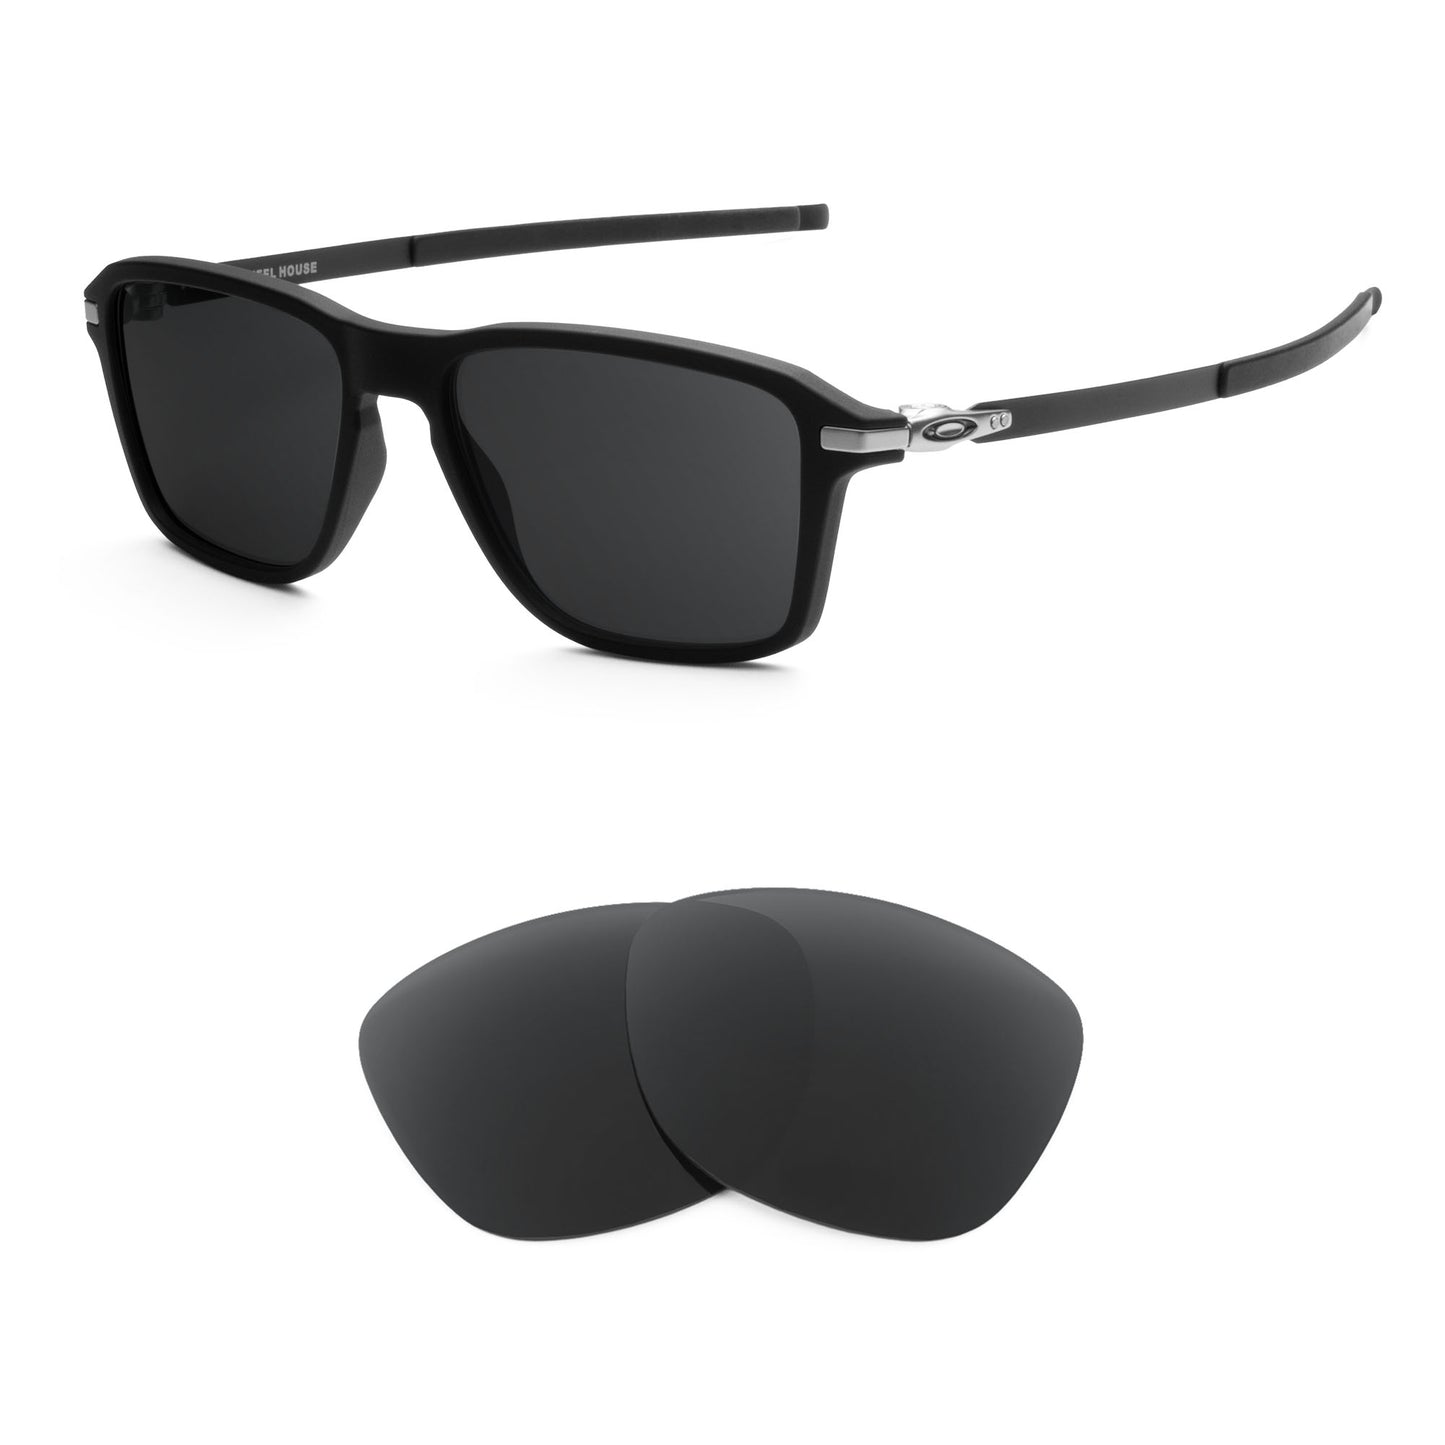 Oakley Wheel House sunglasses with replacement lenses